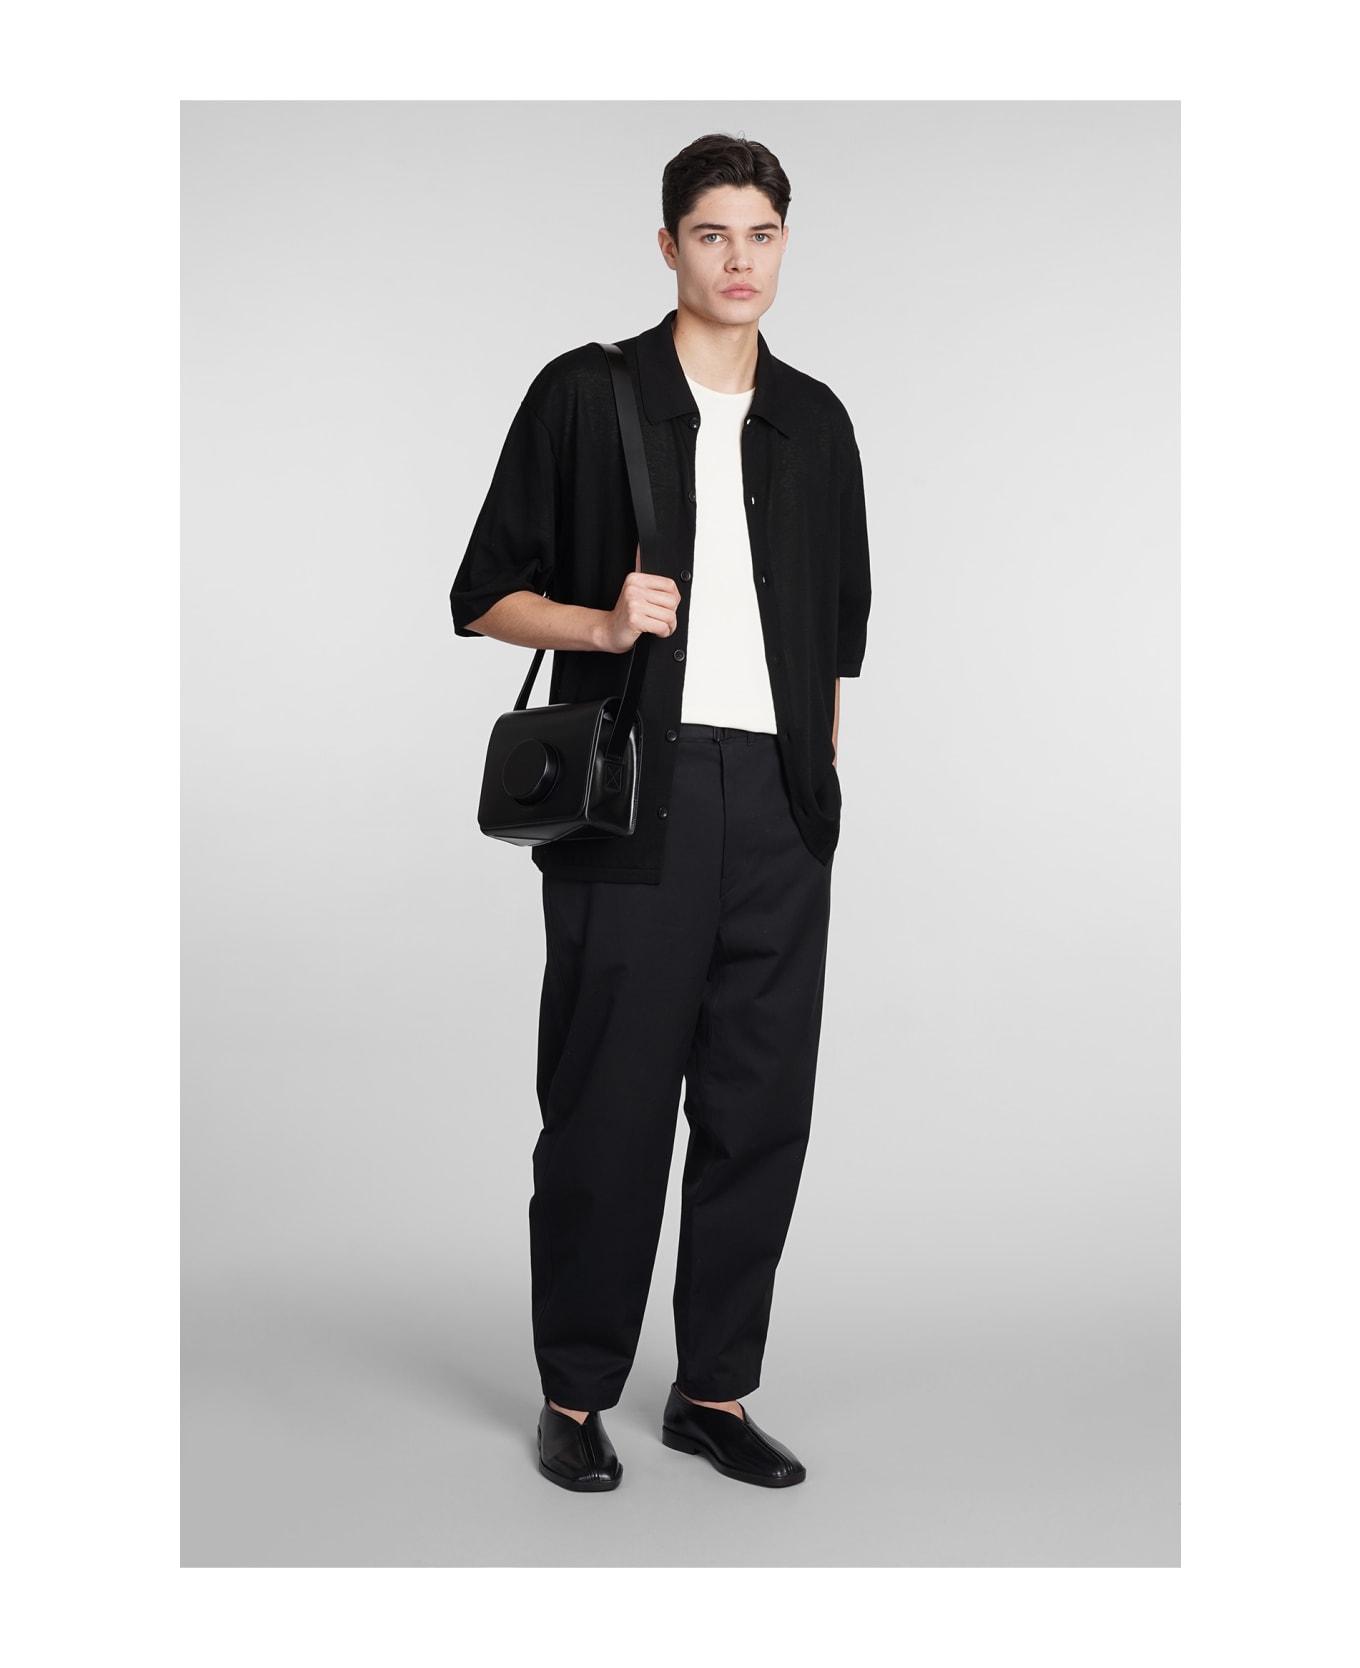 Lemaire Polo In Black Cotton - black